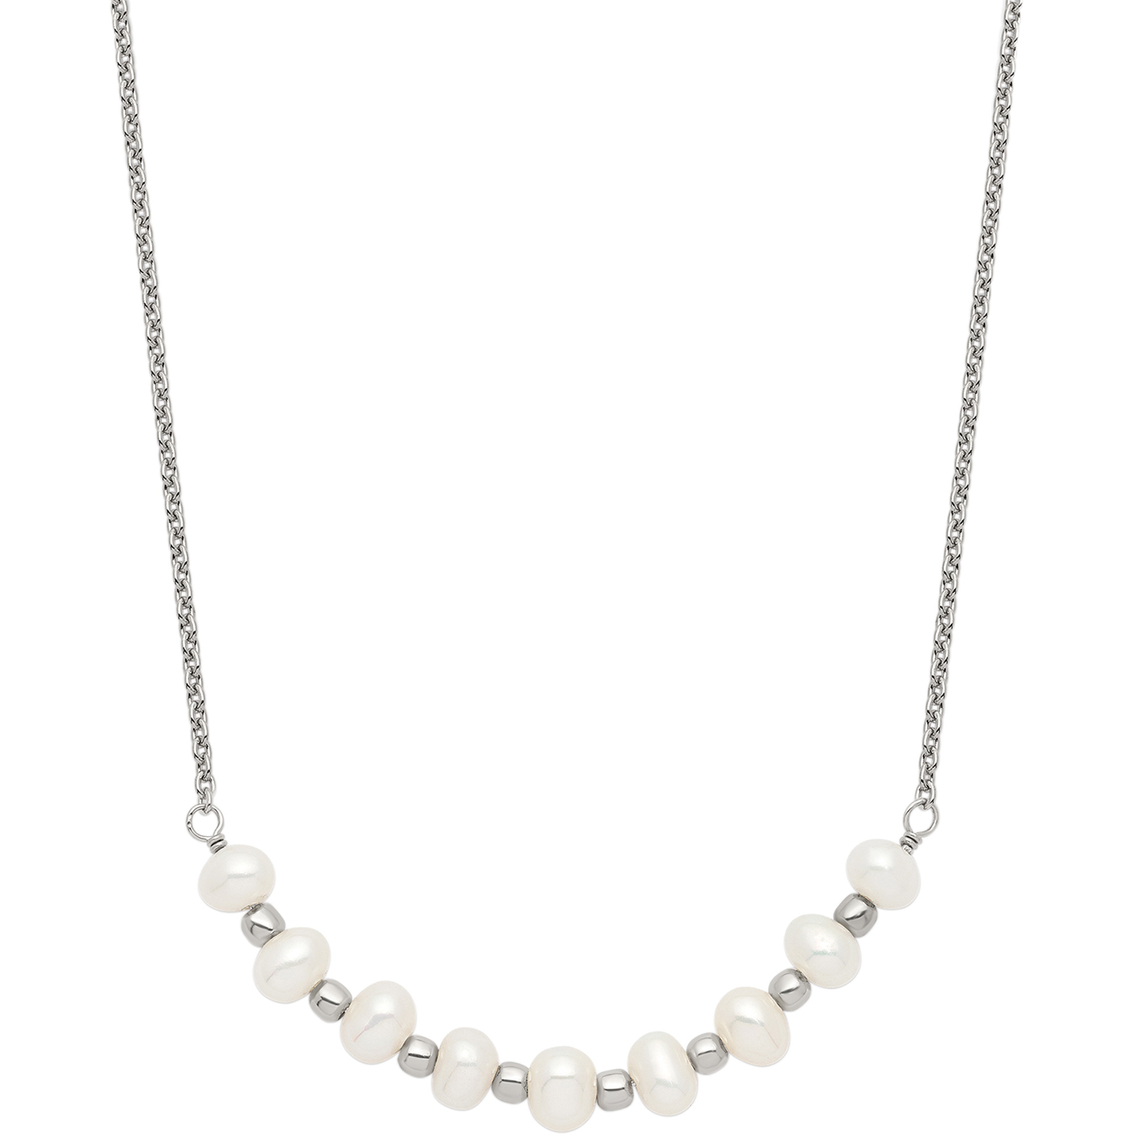 Sterling Silver Freshwater Cultured Pearl Necklace - Image 2 of 3